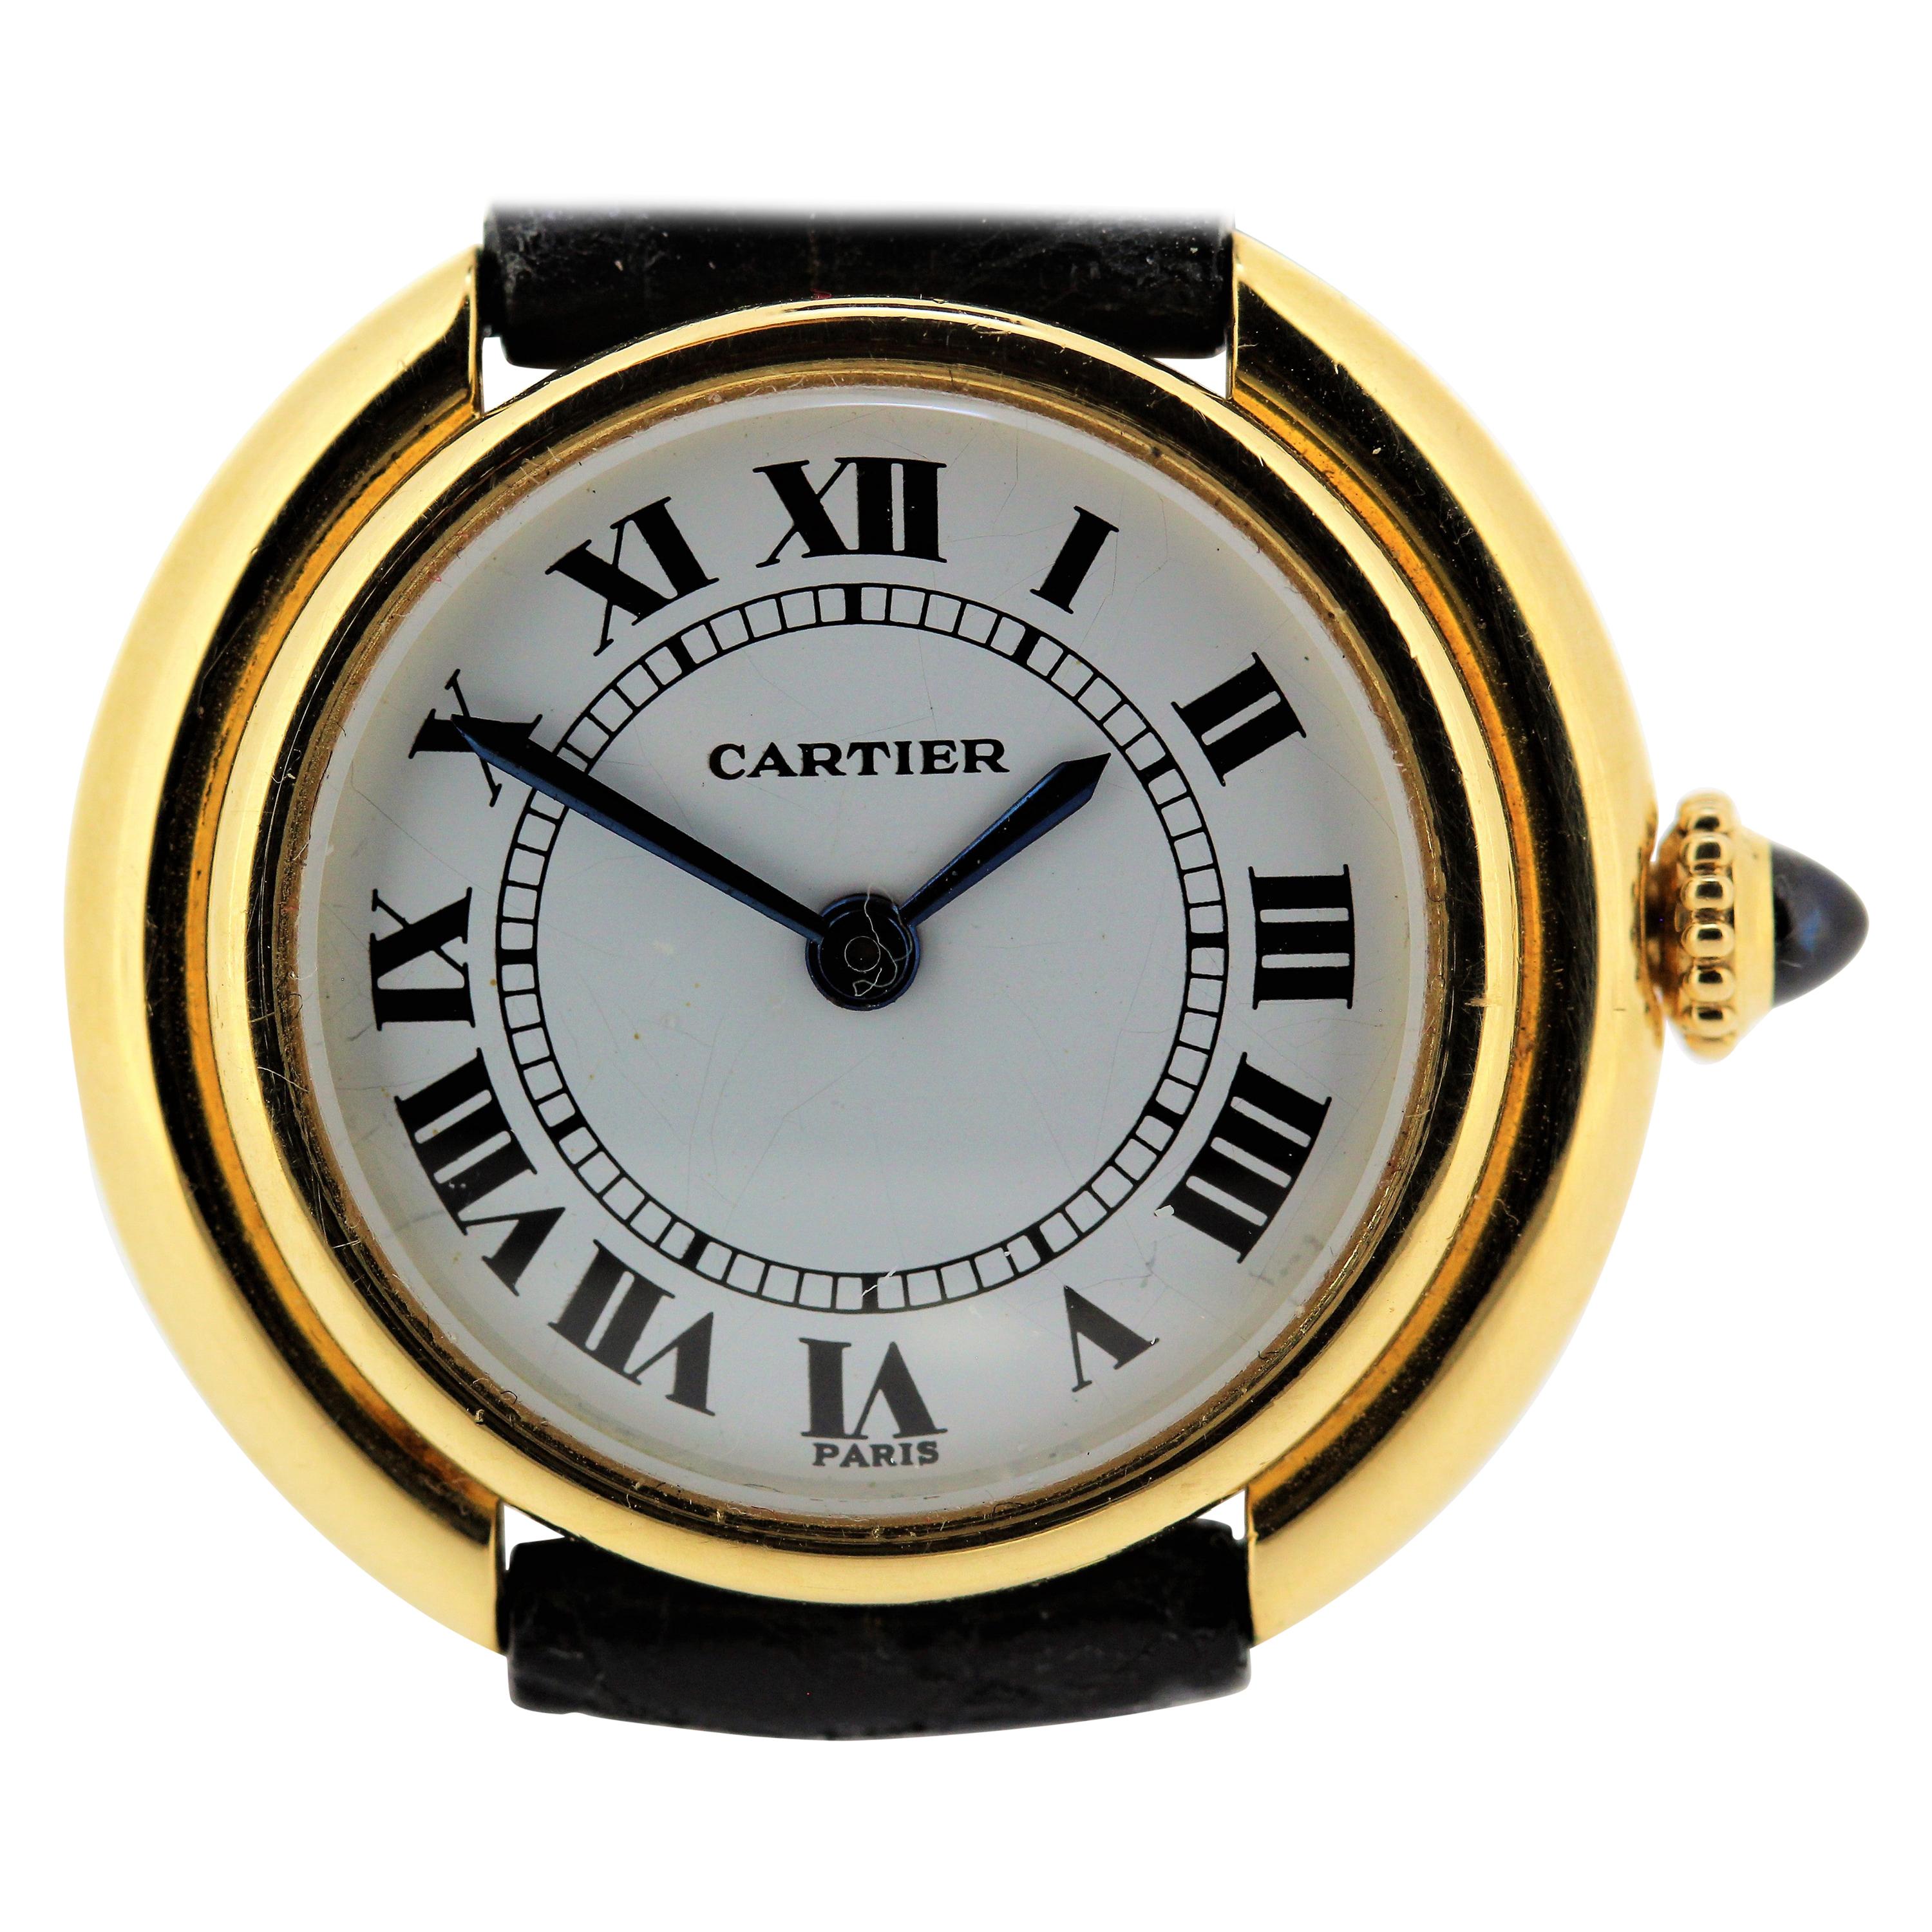 Introduction:
This Vintage Cartier Paris Vendome watch is the large size, circa 1975-1980.  The watch is made in 18 Karat yellow gold and measures 33 mm with an automatic movement.  The watch has a Cartier black Lizard strap and 18K Cartier vintage